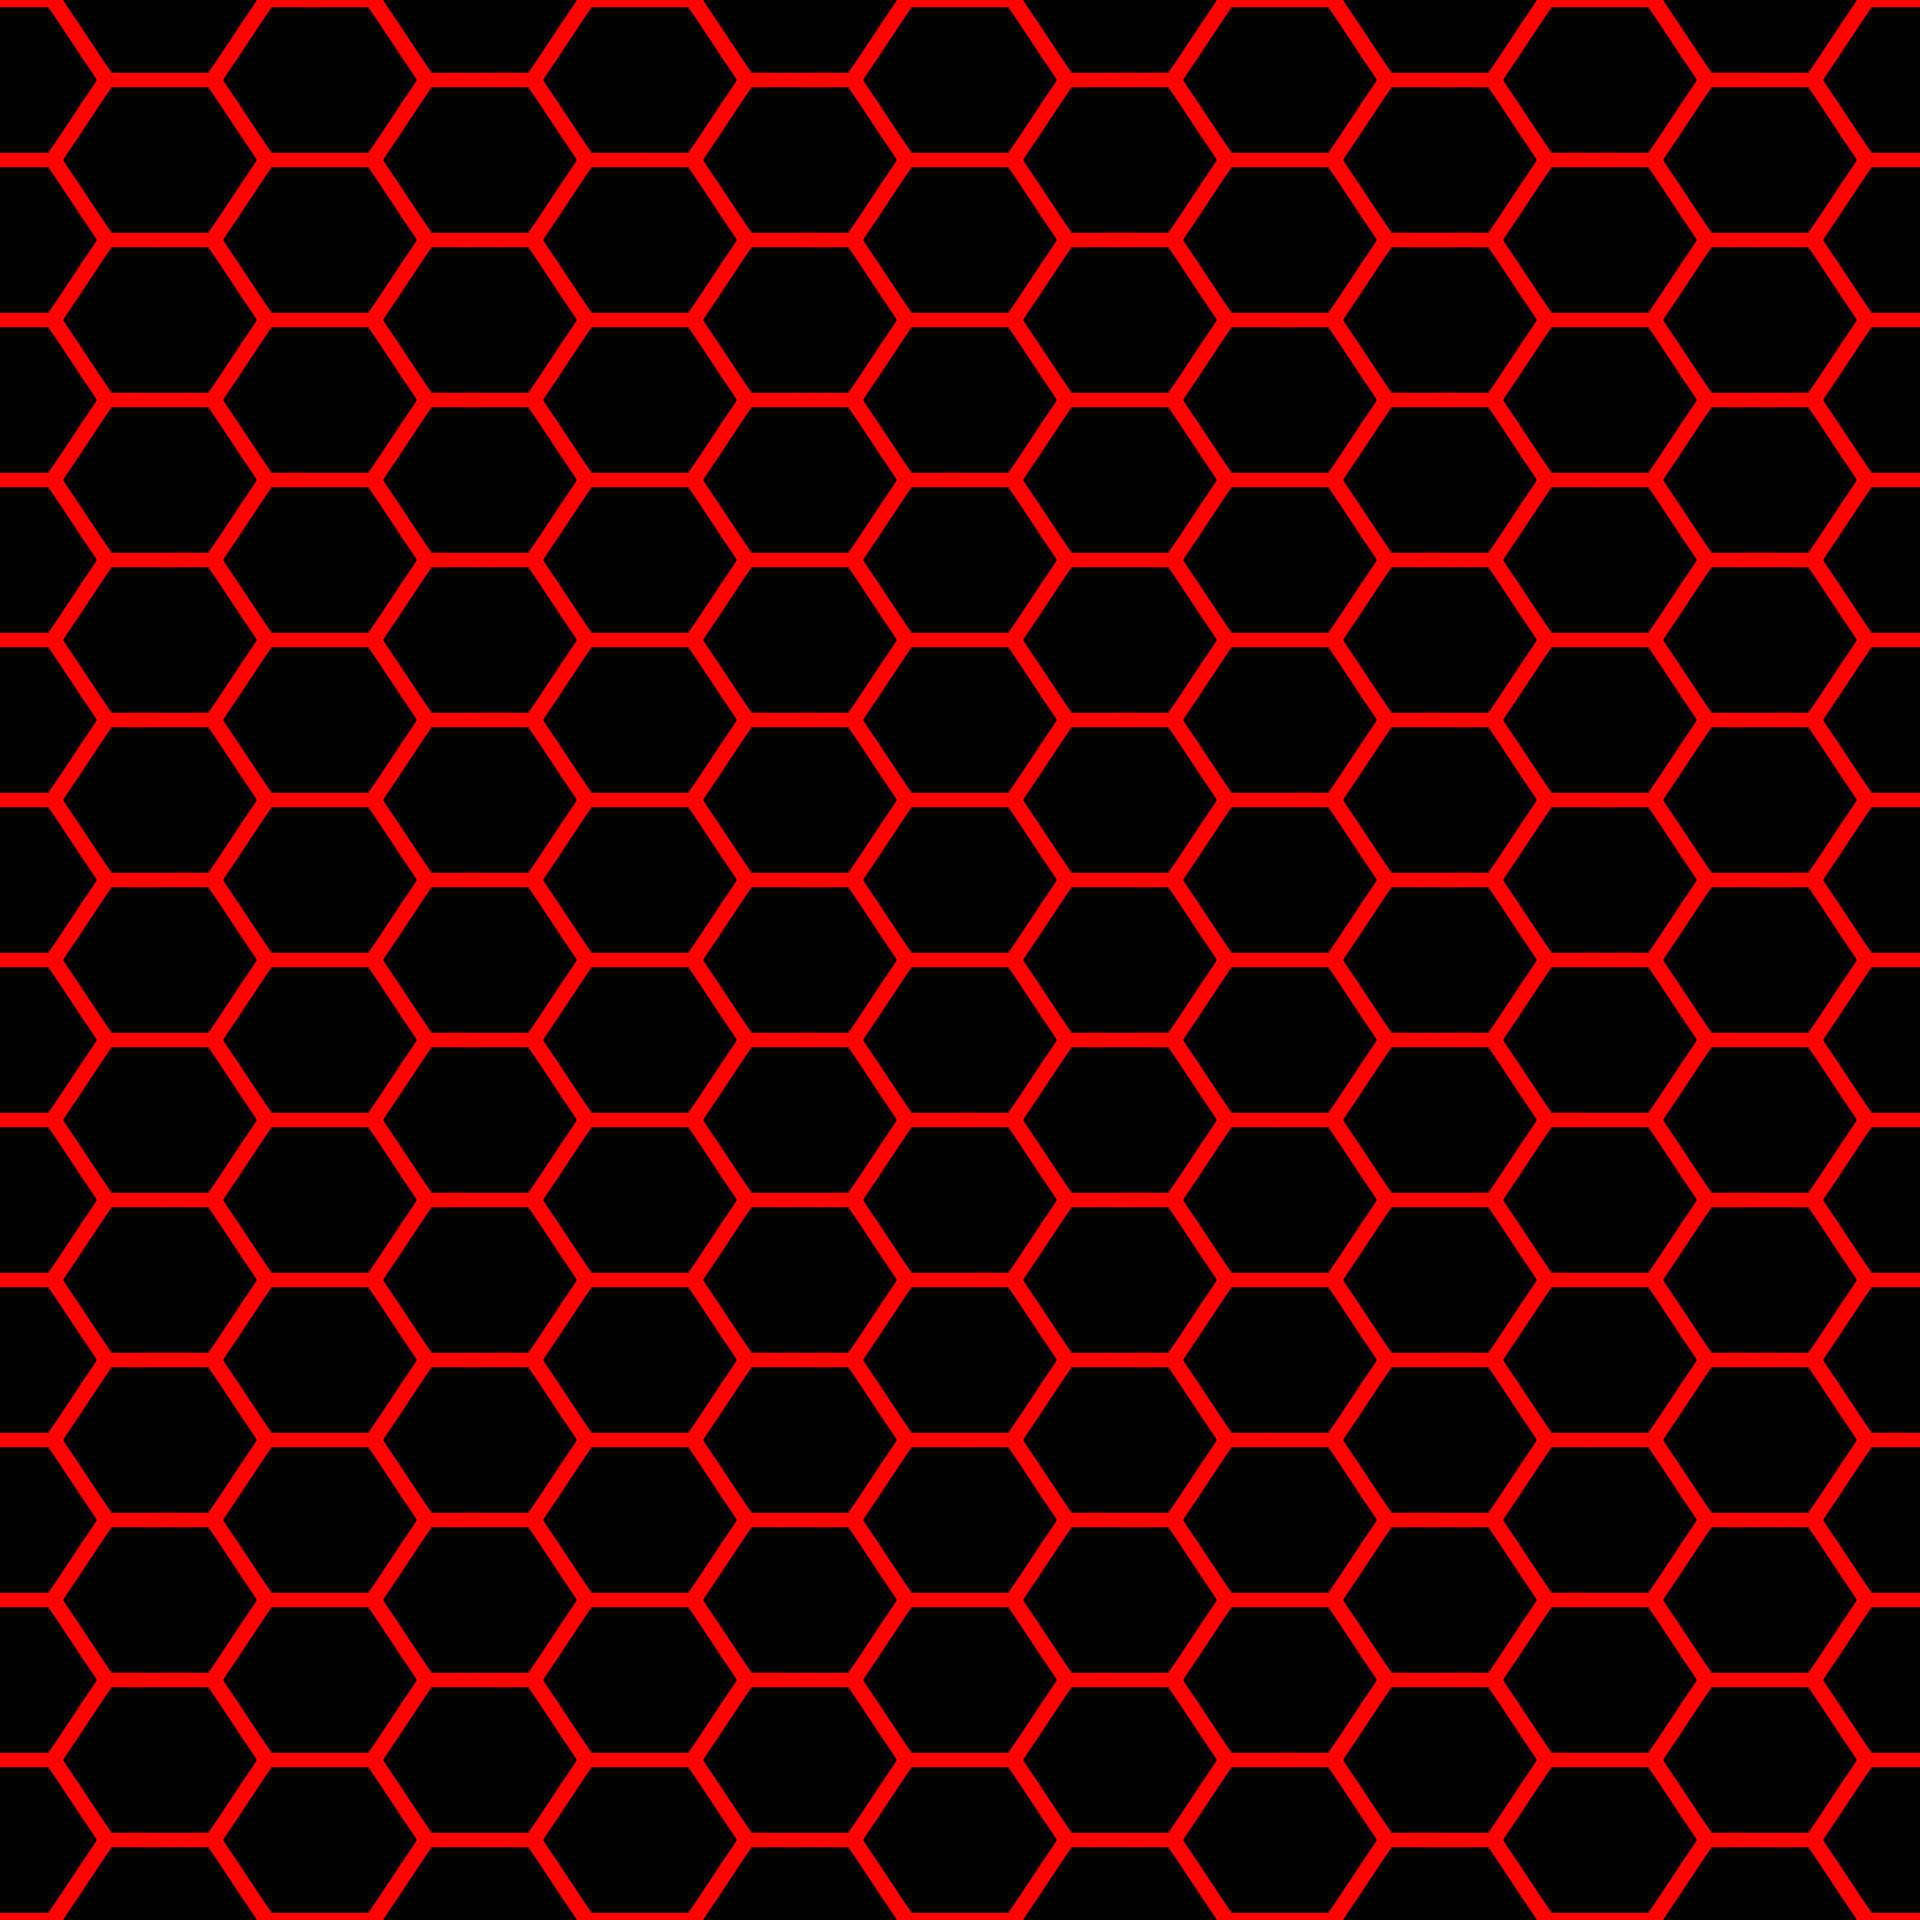 Red & black pictures - Page 19 Hypnotising-black-and-red-hexagons-1bcjfbamkbdurj5y